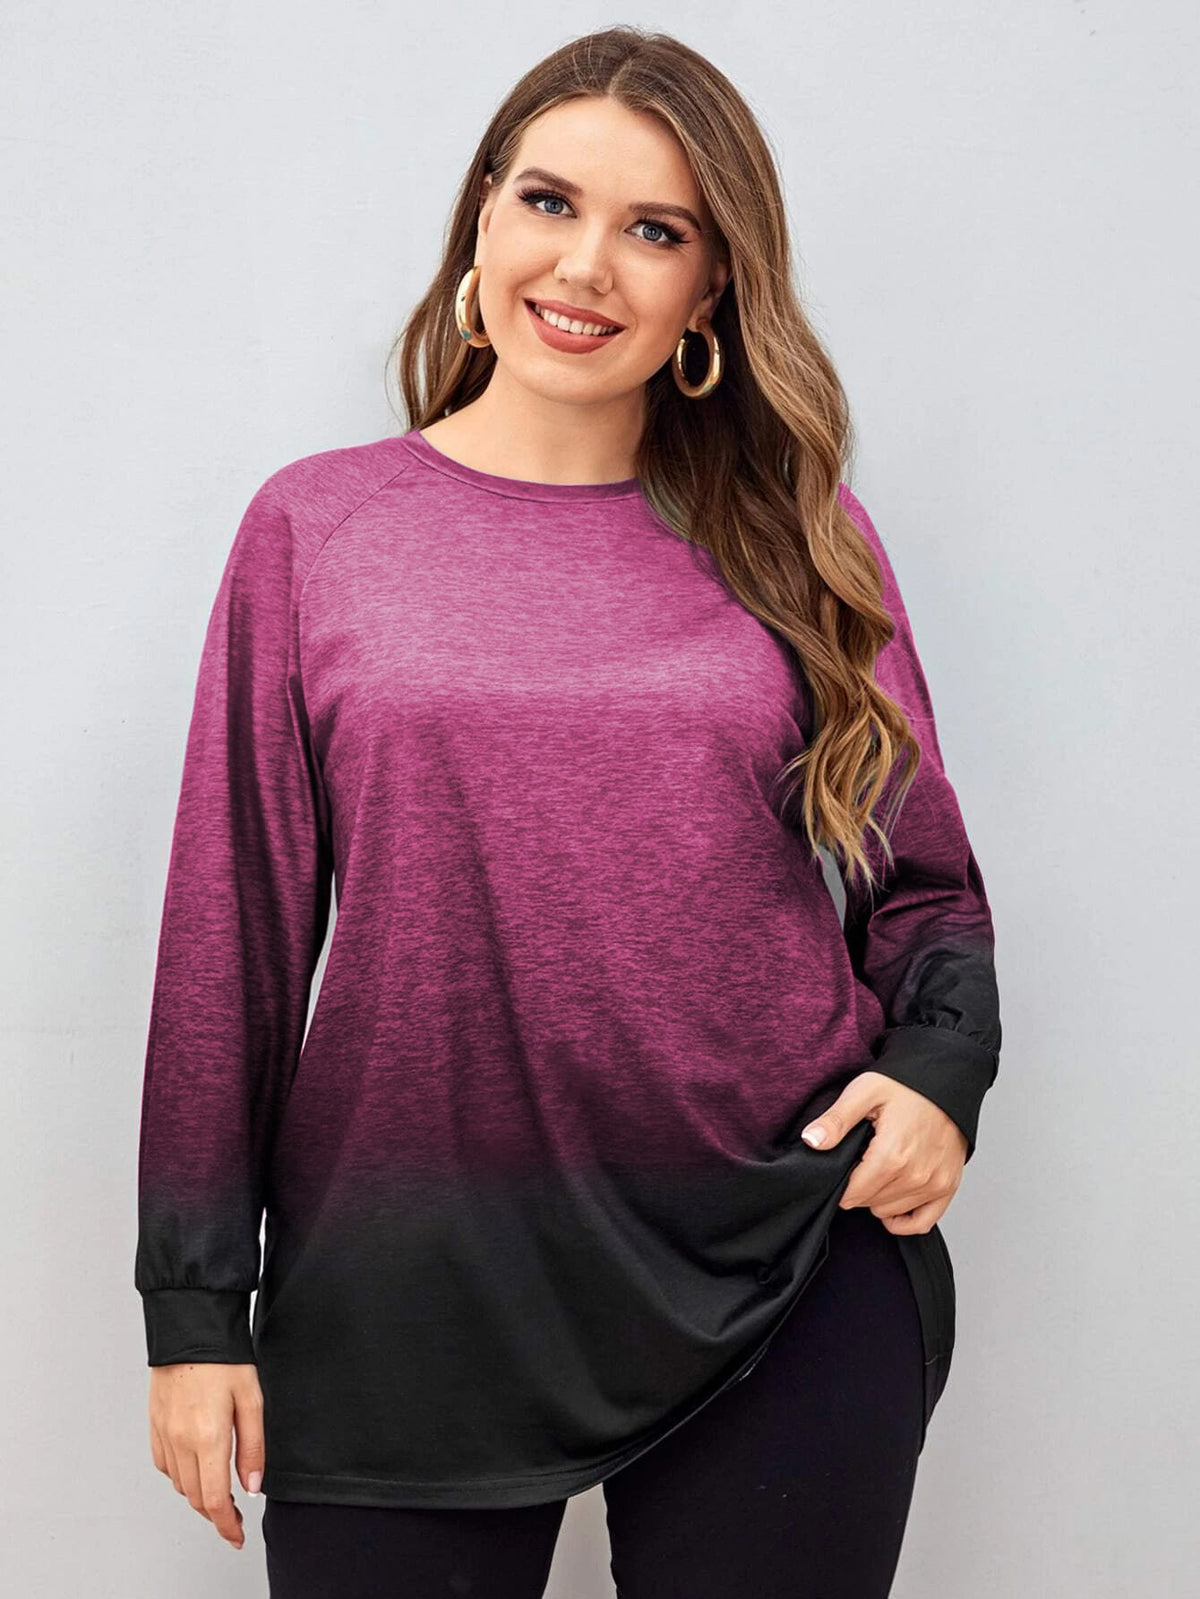 Plus Size Two Tone Tee with Raglan Sleeve - Multicolor-3 / 4XL